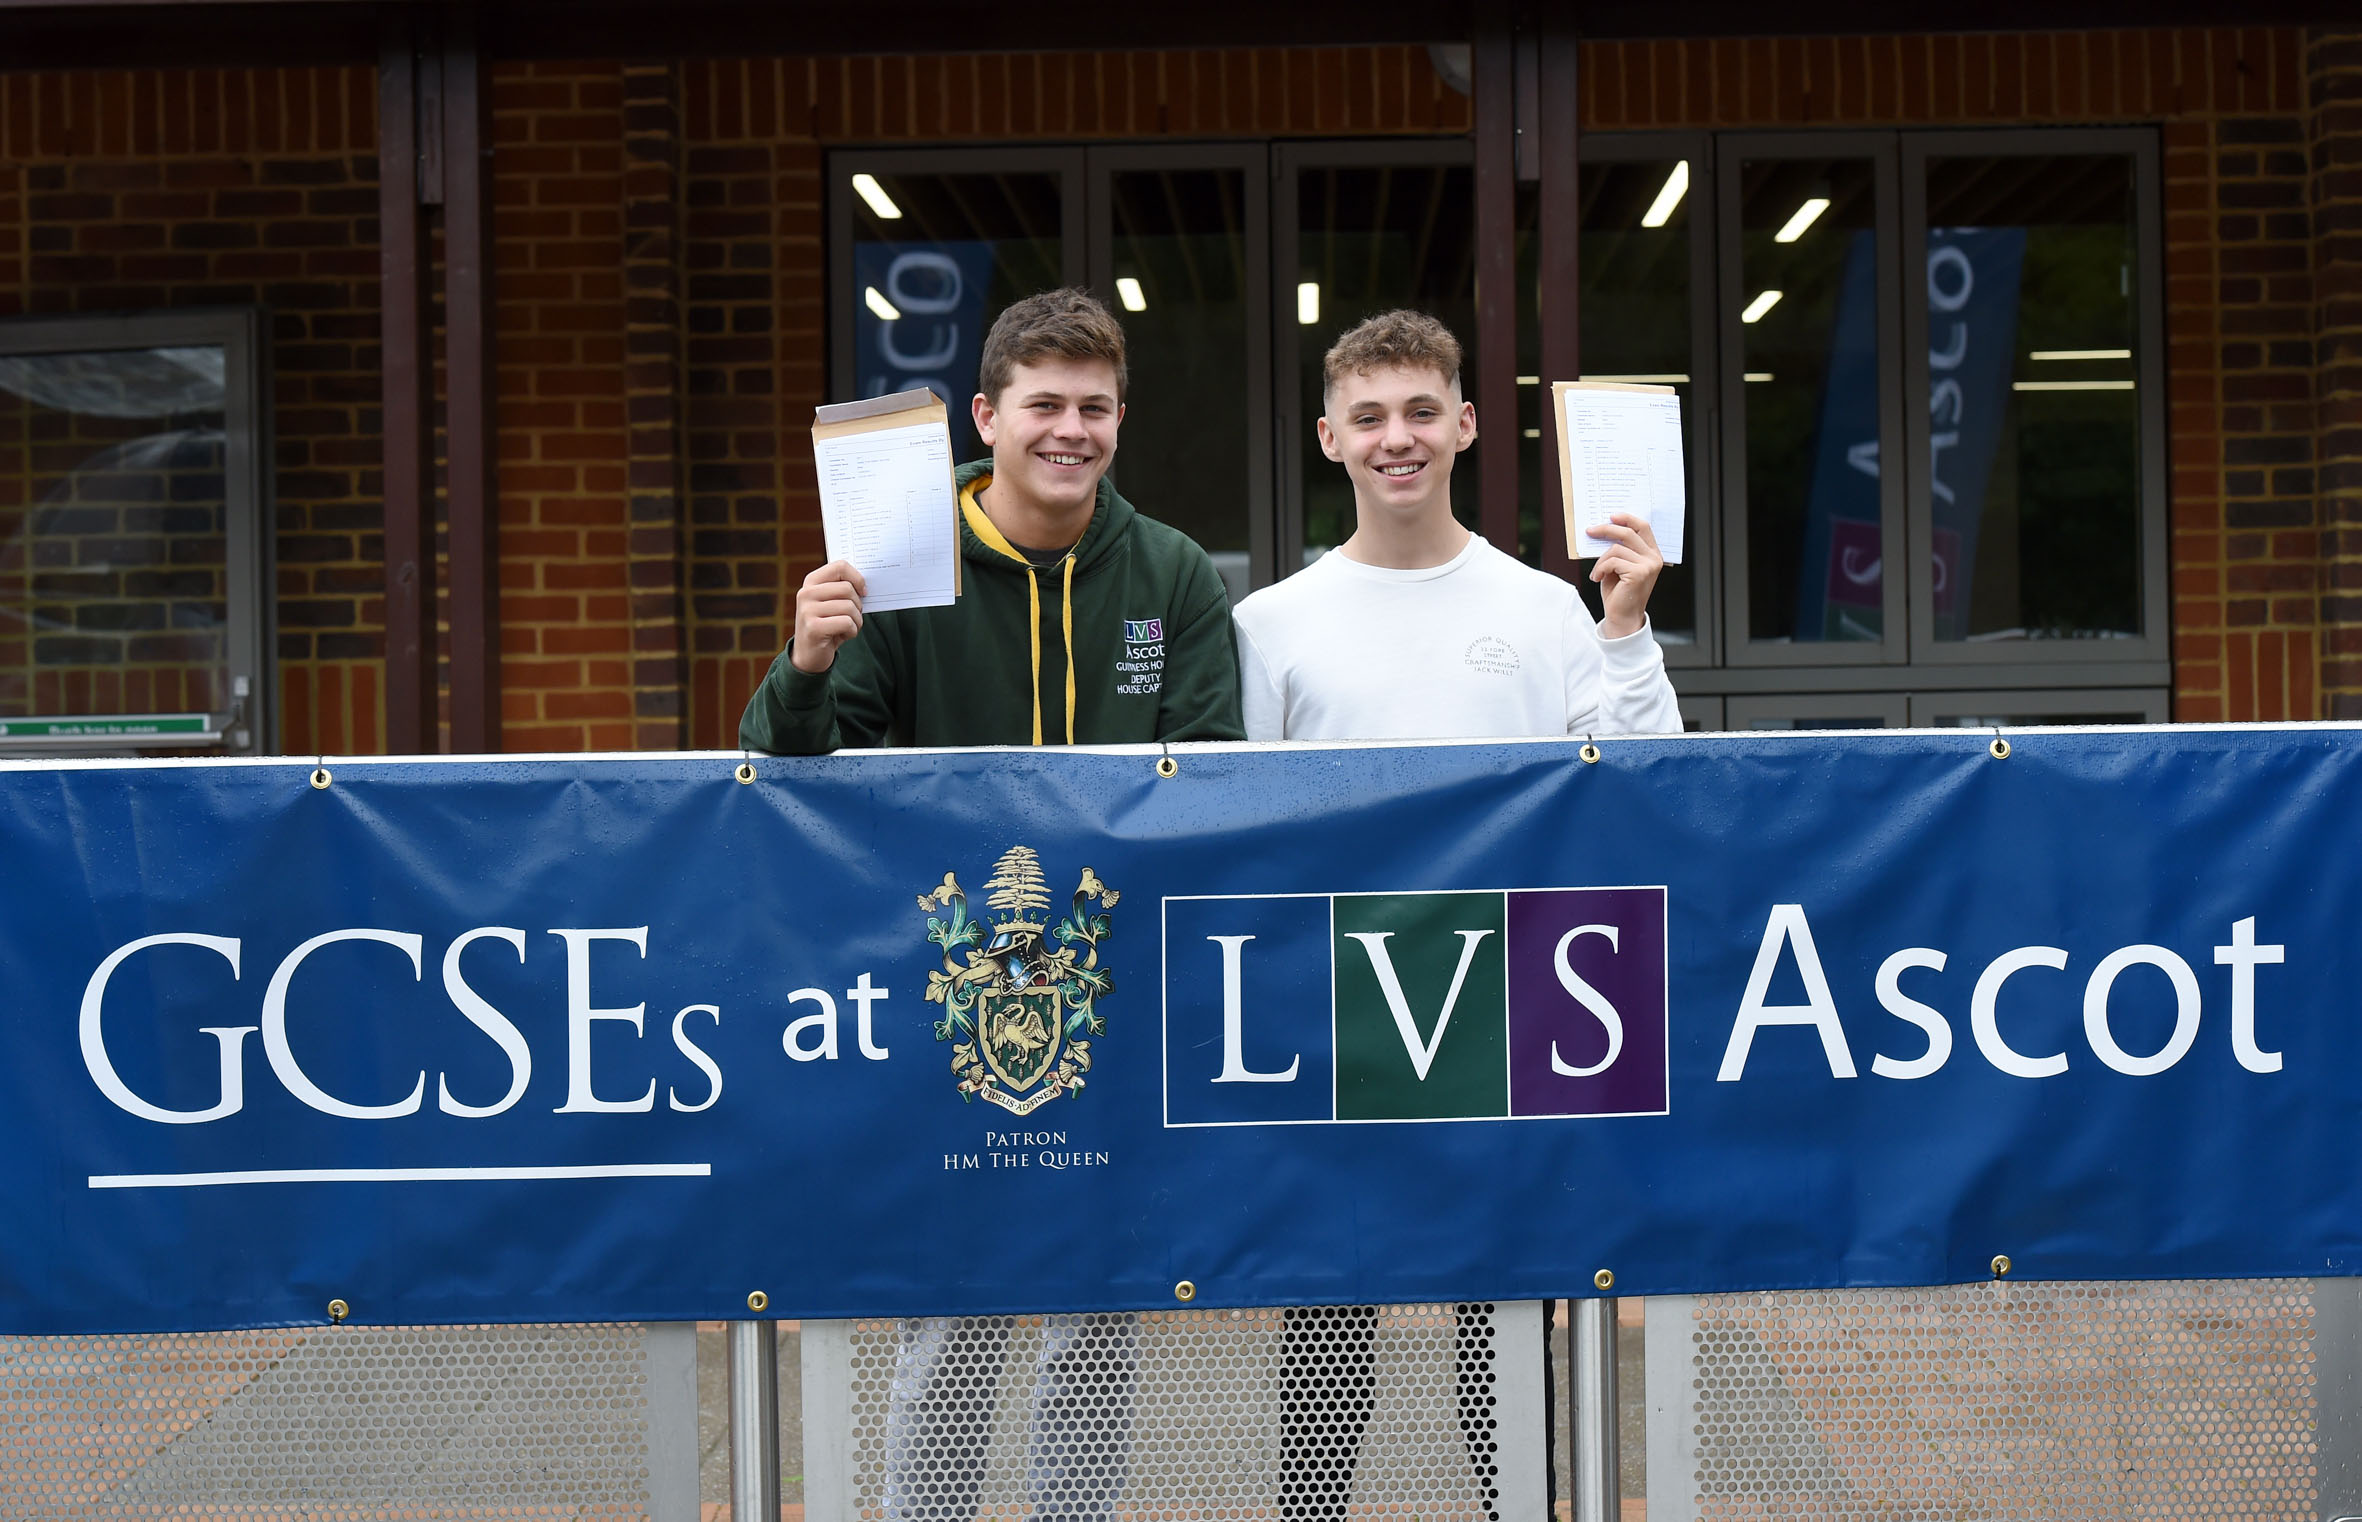 Students holding their GCSE results and smiling